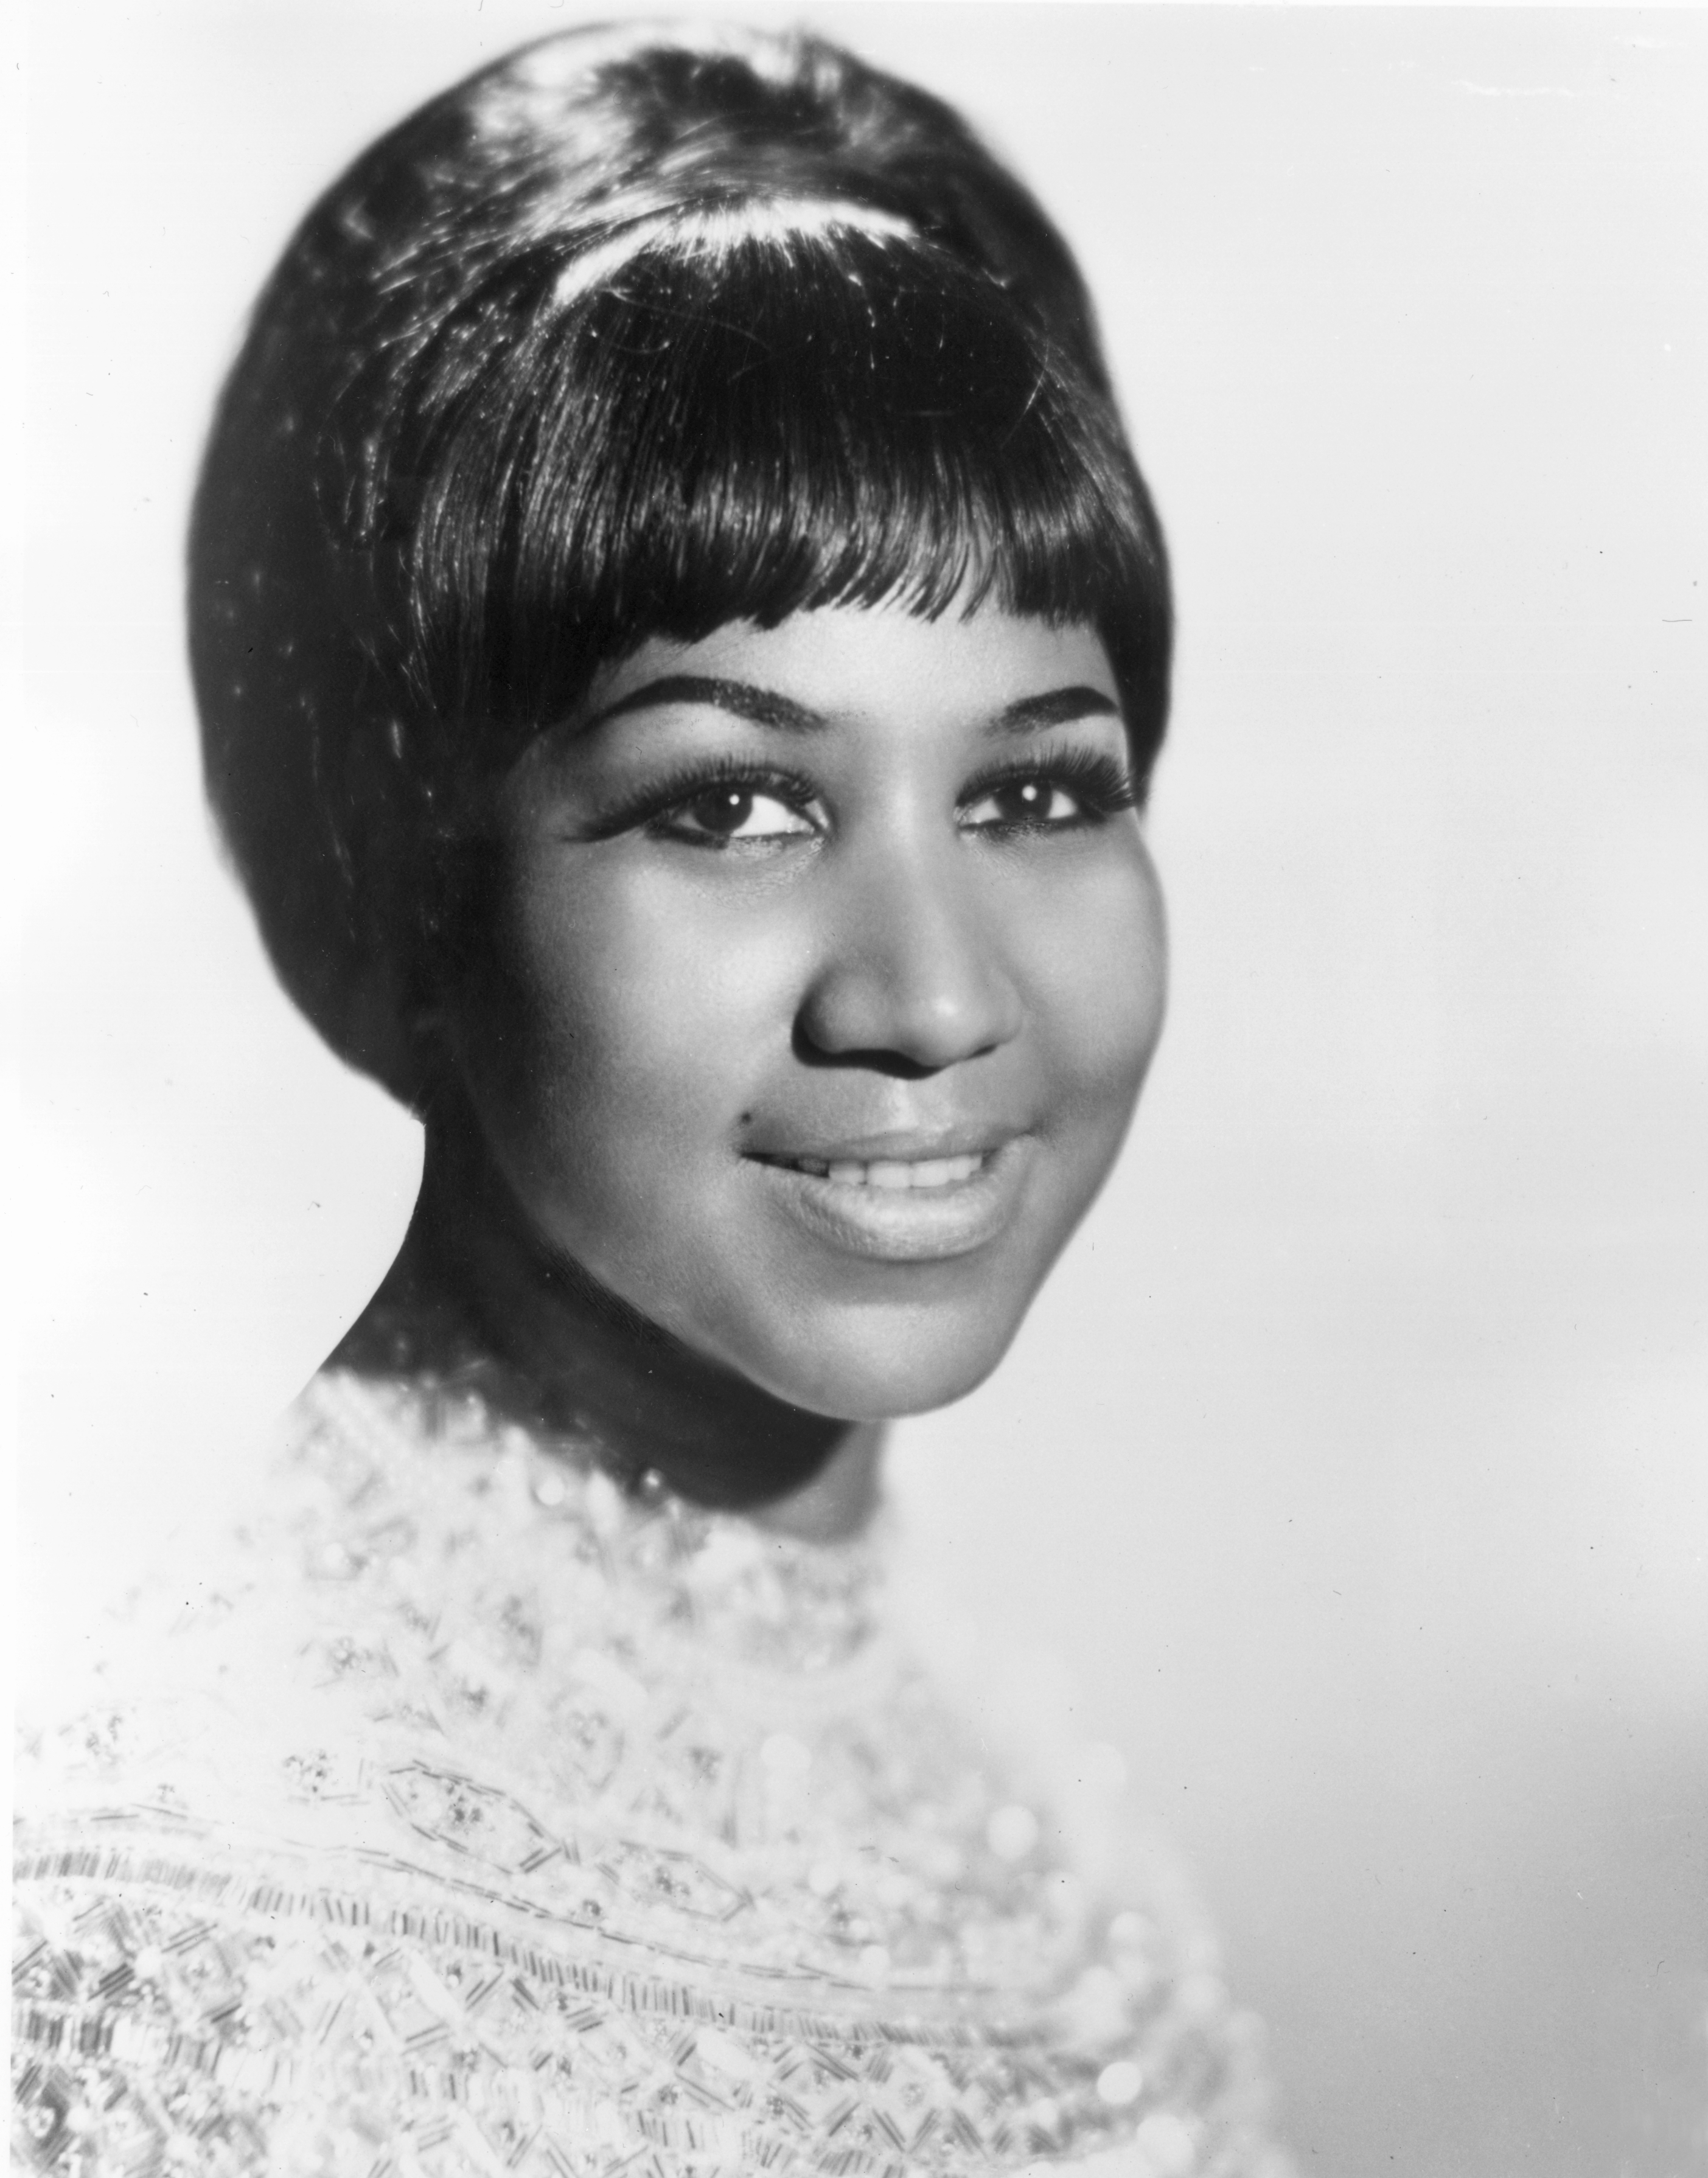 Aretha Franklin photographed in 1960 | Source: Getty images.